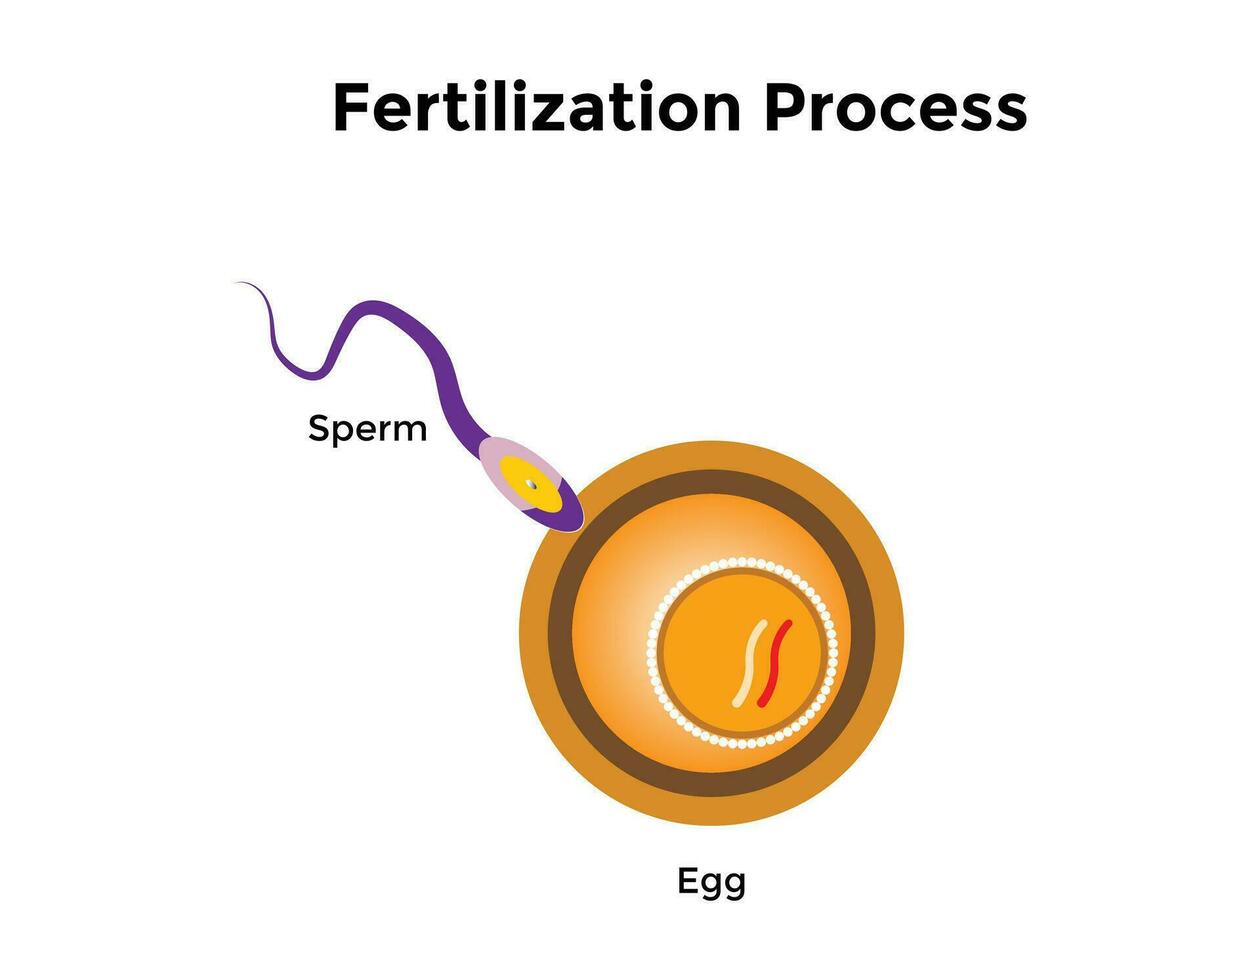 Human fertilization is the union of a human egg and sperm vector